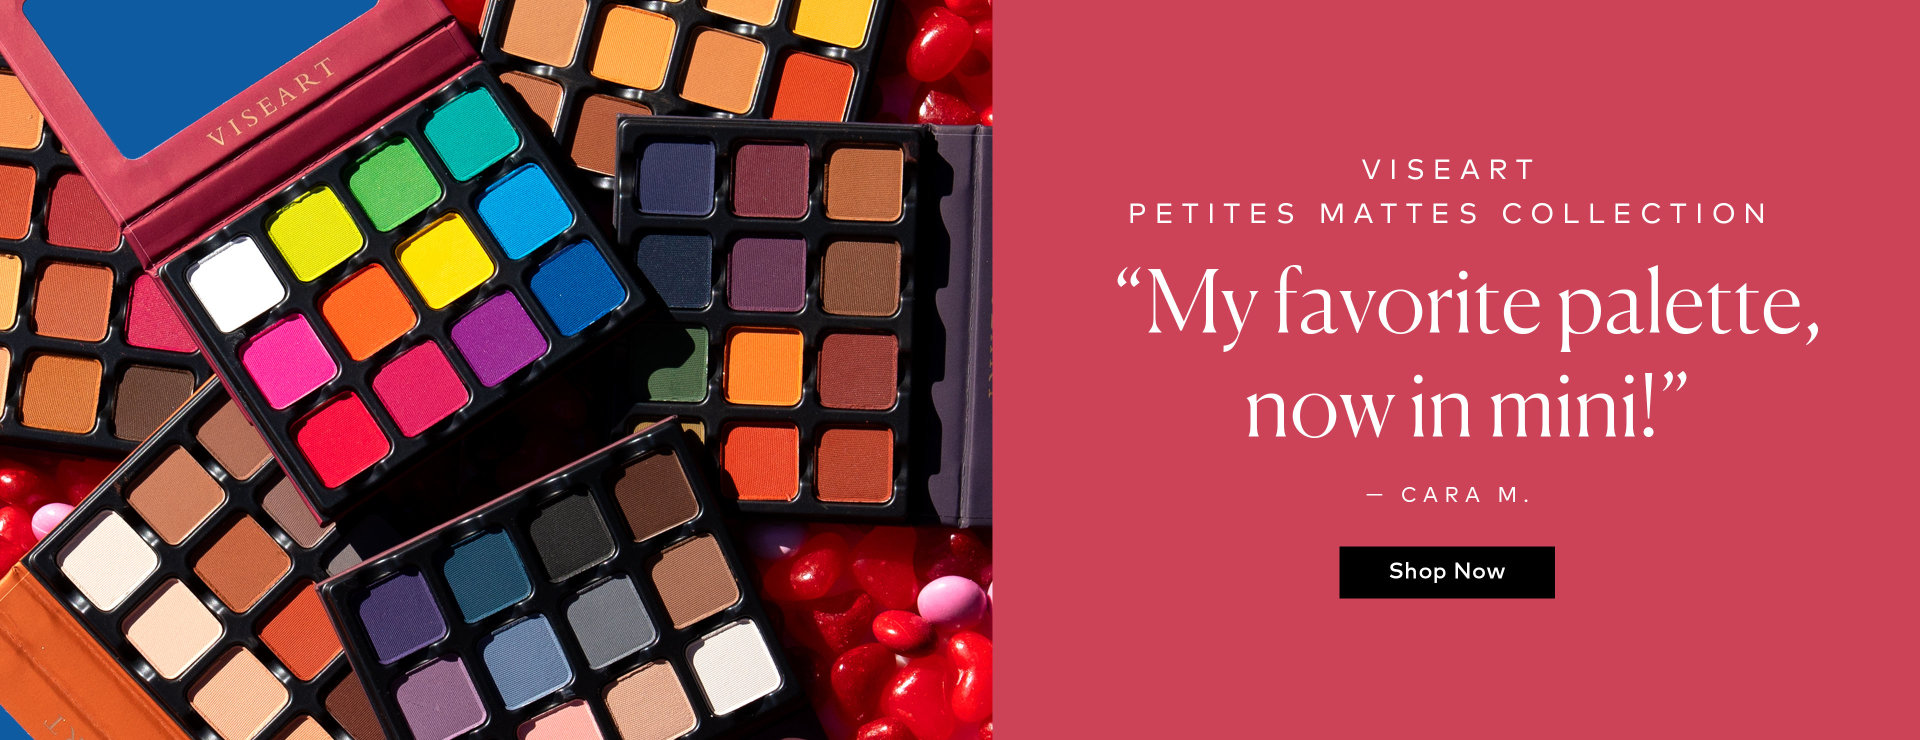 See why people rave about Viseart's Petites Mattes Collection on Beautylish.com